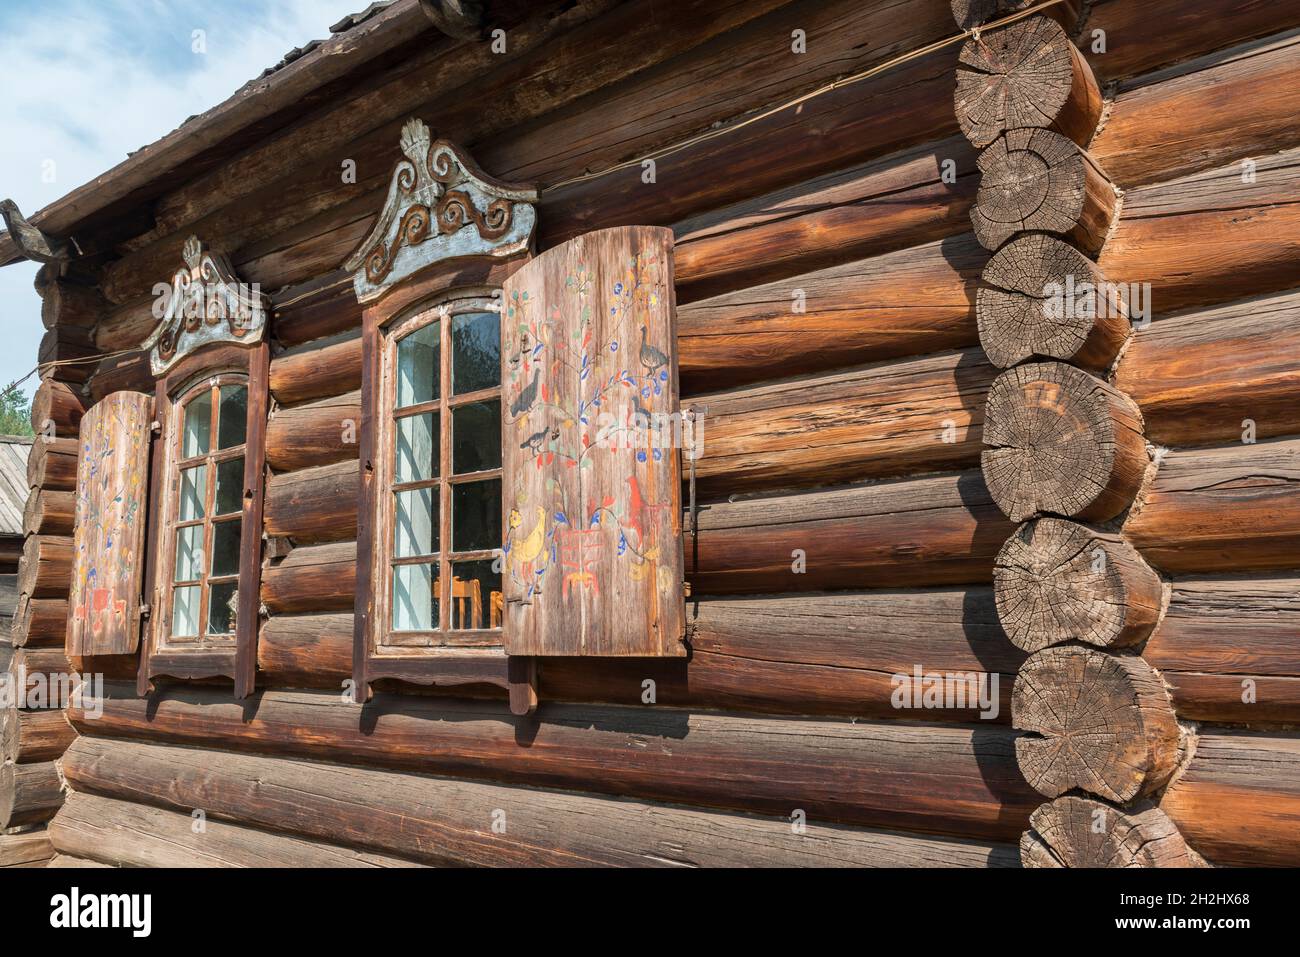 Traditional wooden house with folk art painted shutters in  the open-air Ethnographic museum near Ulan-Ude. Republic of Buryatia, Russia Stock Photo